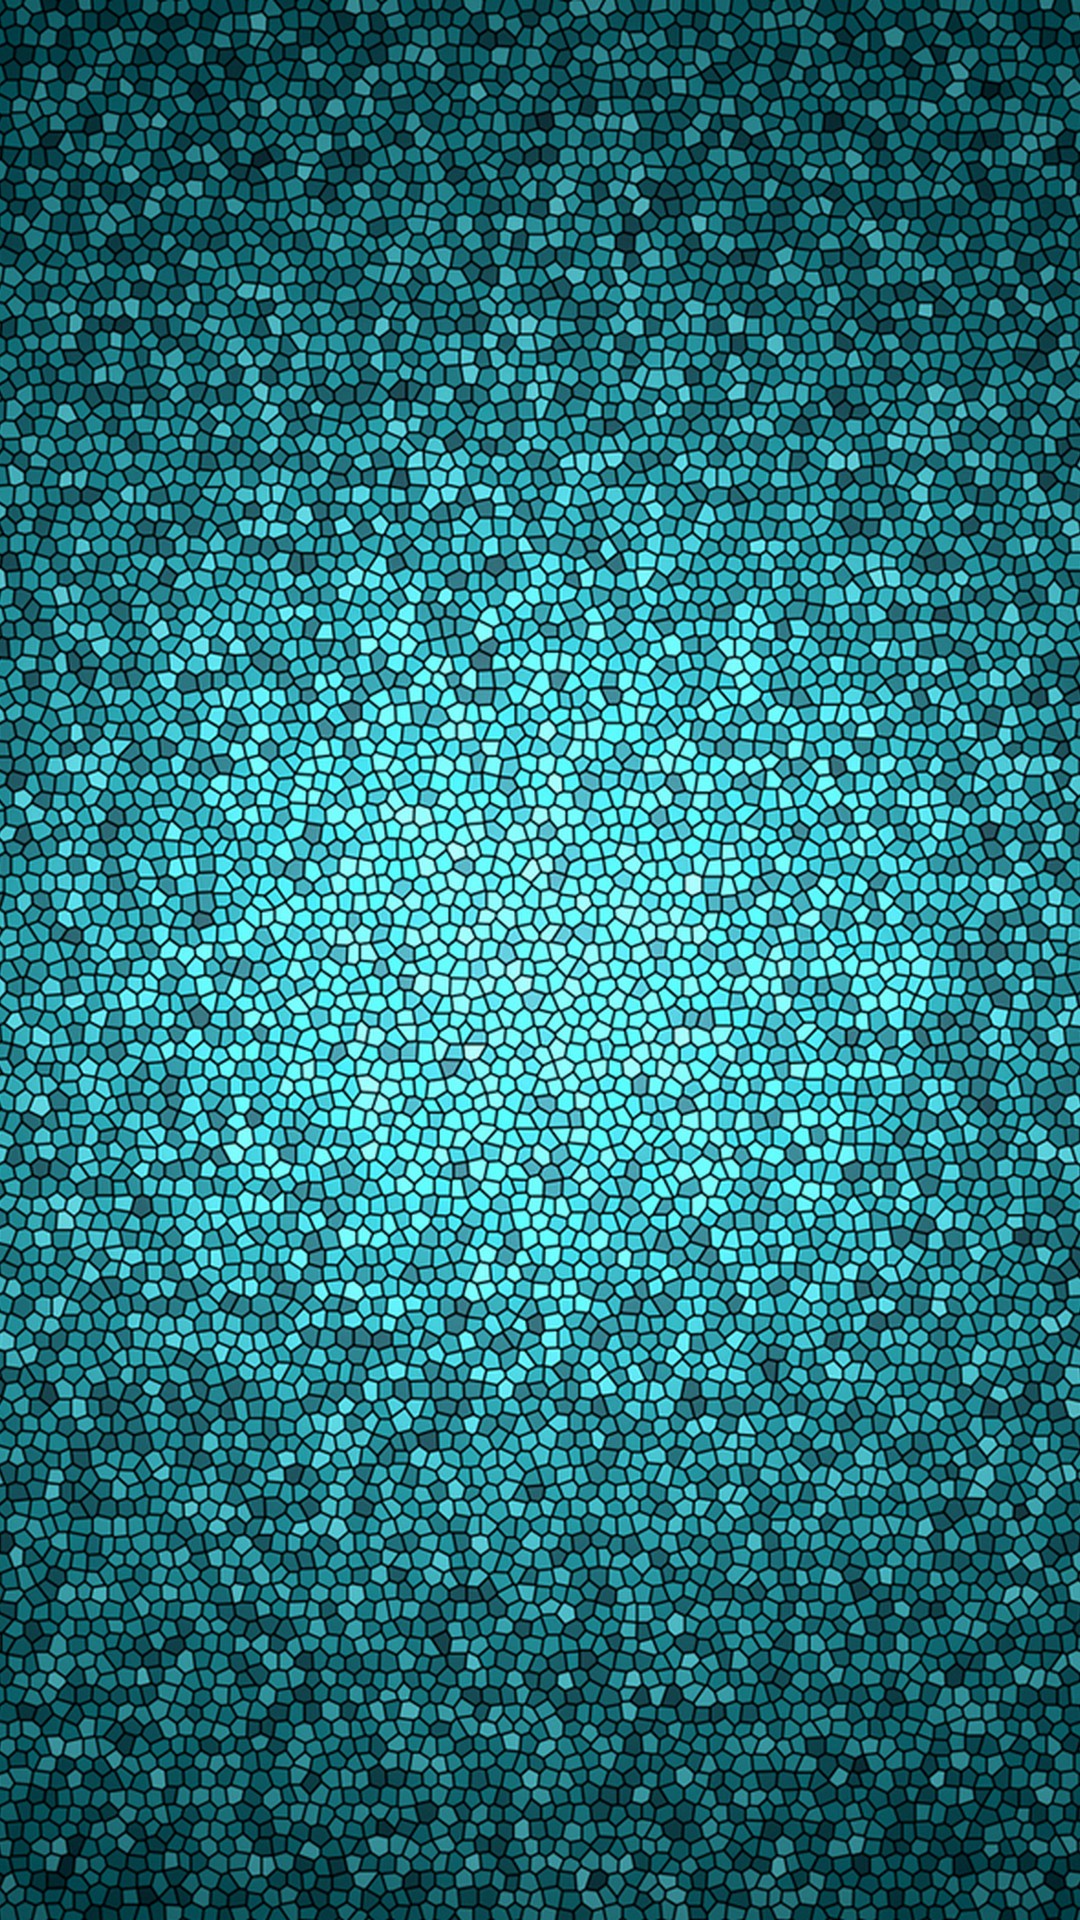 Teal Phone Backgrounds with image resolution 1080x1920 pixel. You can make this wallpaper for your Desktop Computer Backgrounds, Mac Wallpapers, Android Lock screen or iPhone Screensavers